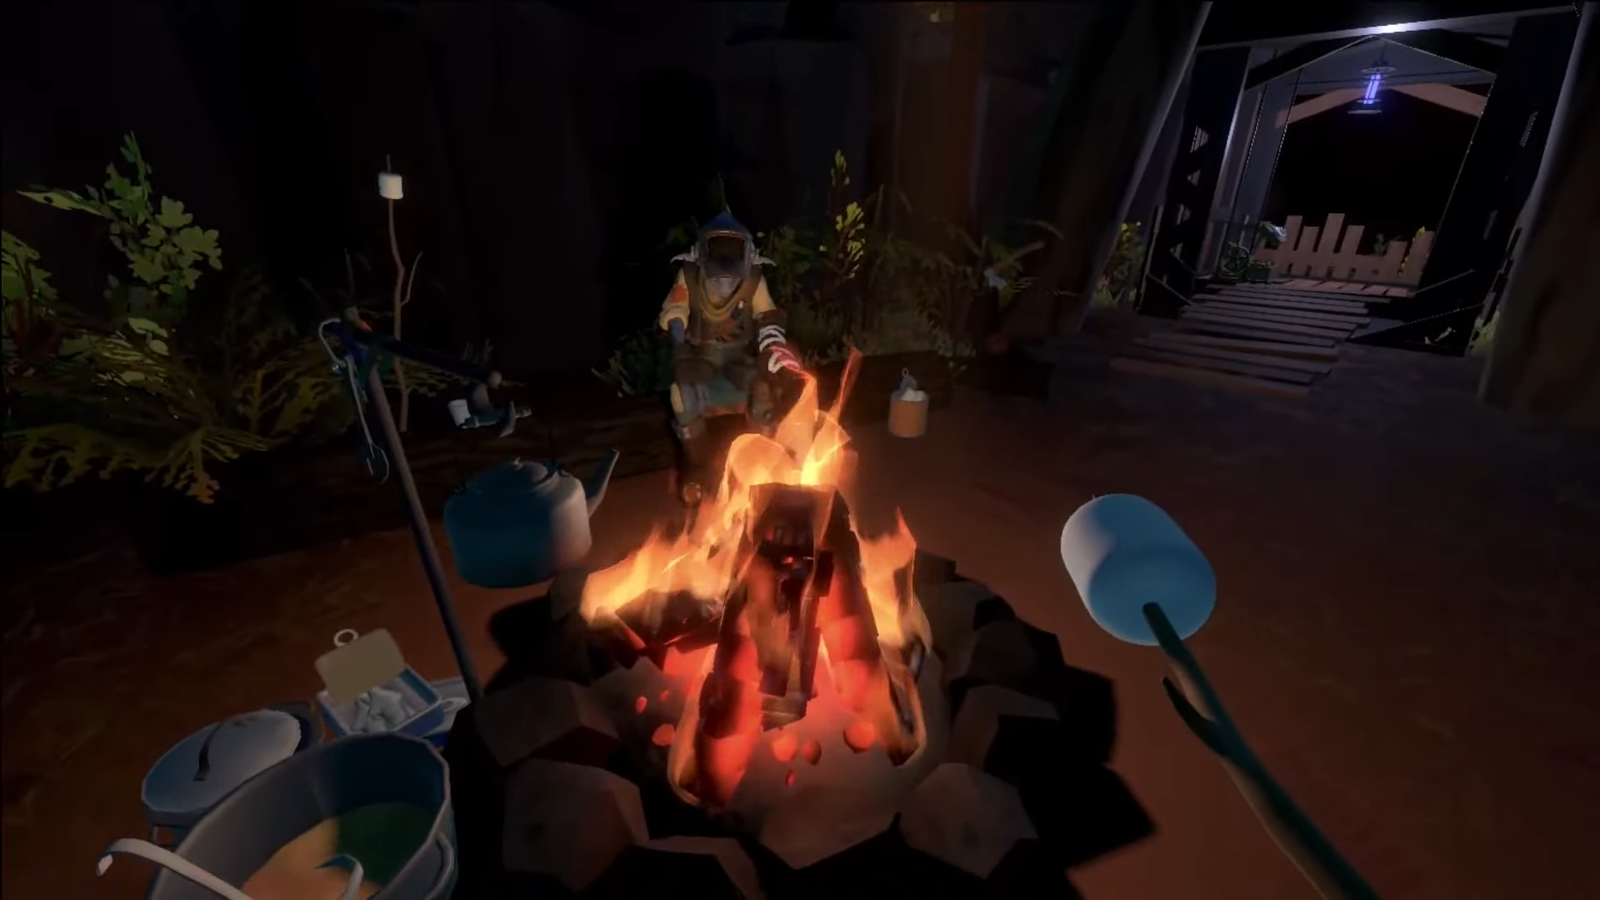 Outer Wilds: Echoes of the Eye for Nintendo Switch - Nintendo Official Site